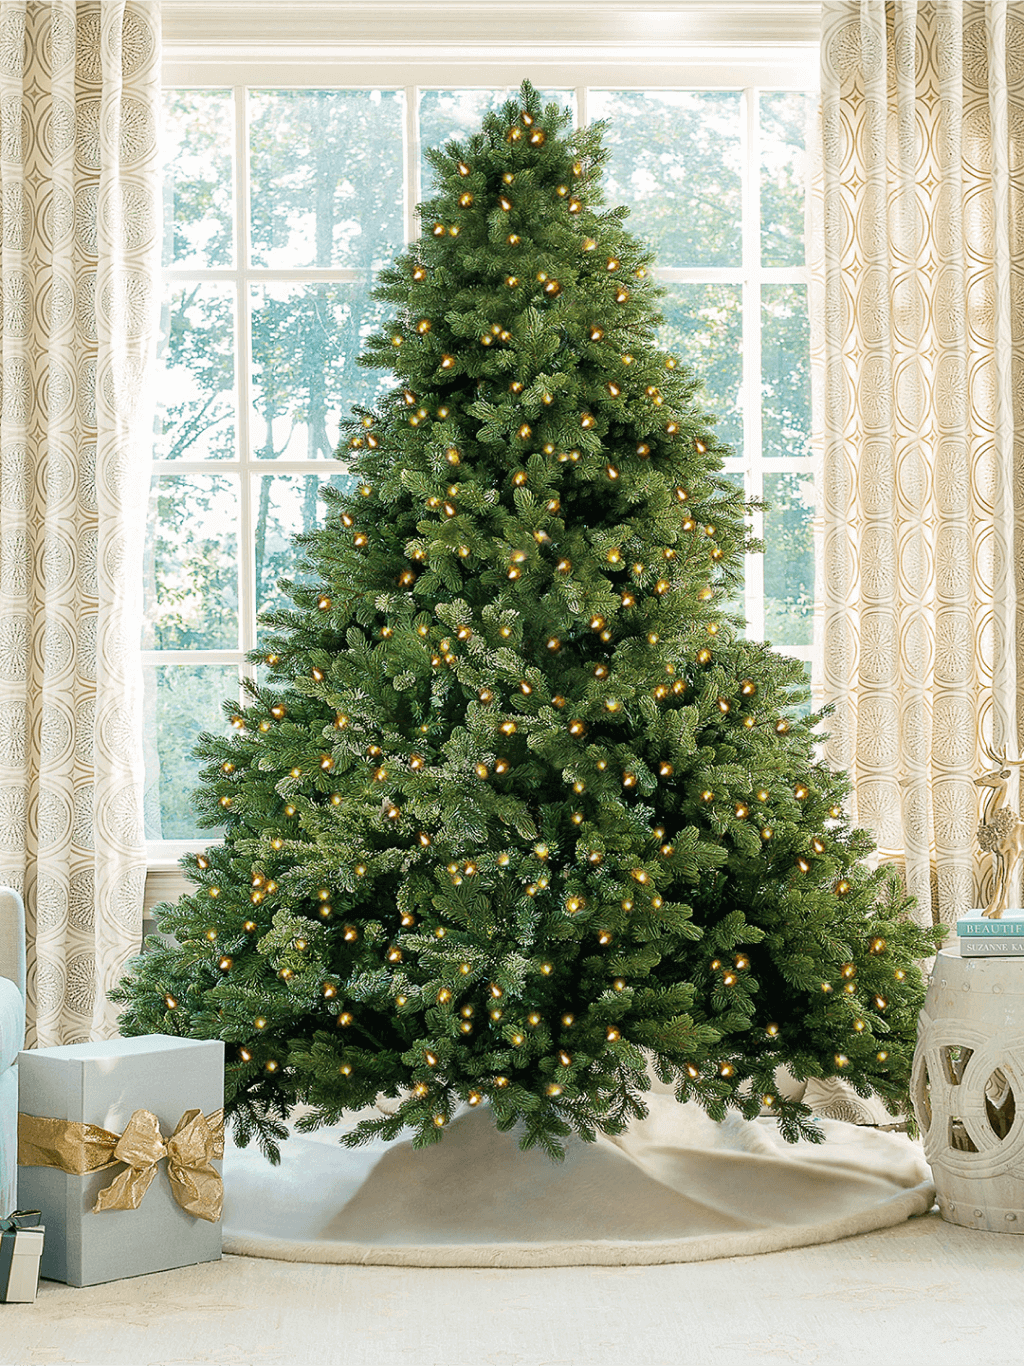 King of Christmas 7.5' Cypress Spruce Quick-Shape Artificial Christmas Tree with 1450 Warm White & Multi-Color LED Lights